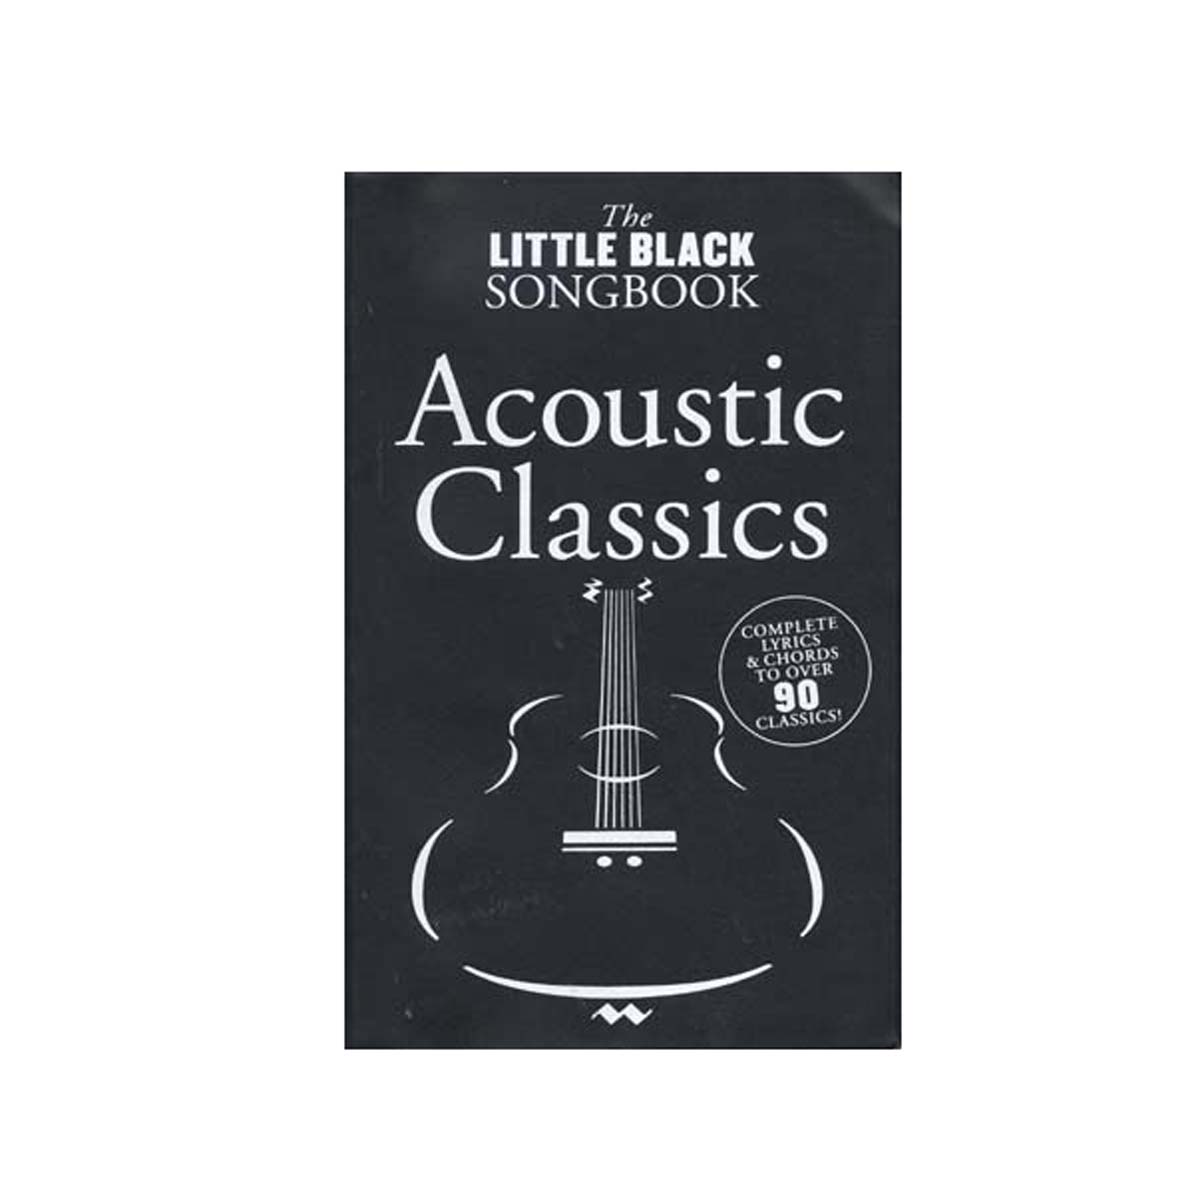 The Little black songbook Acoustic classics